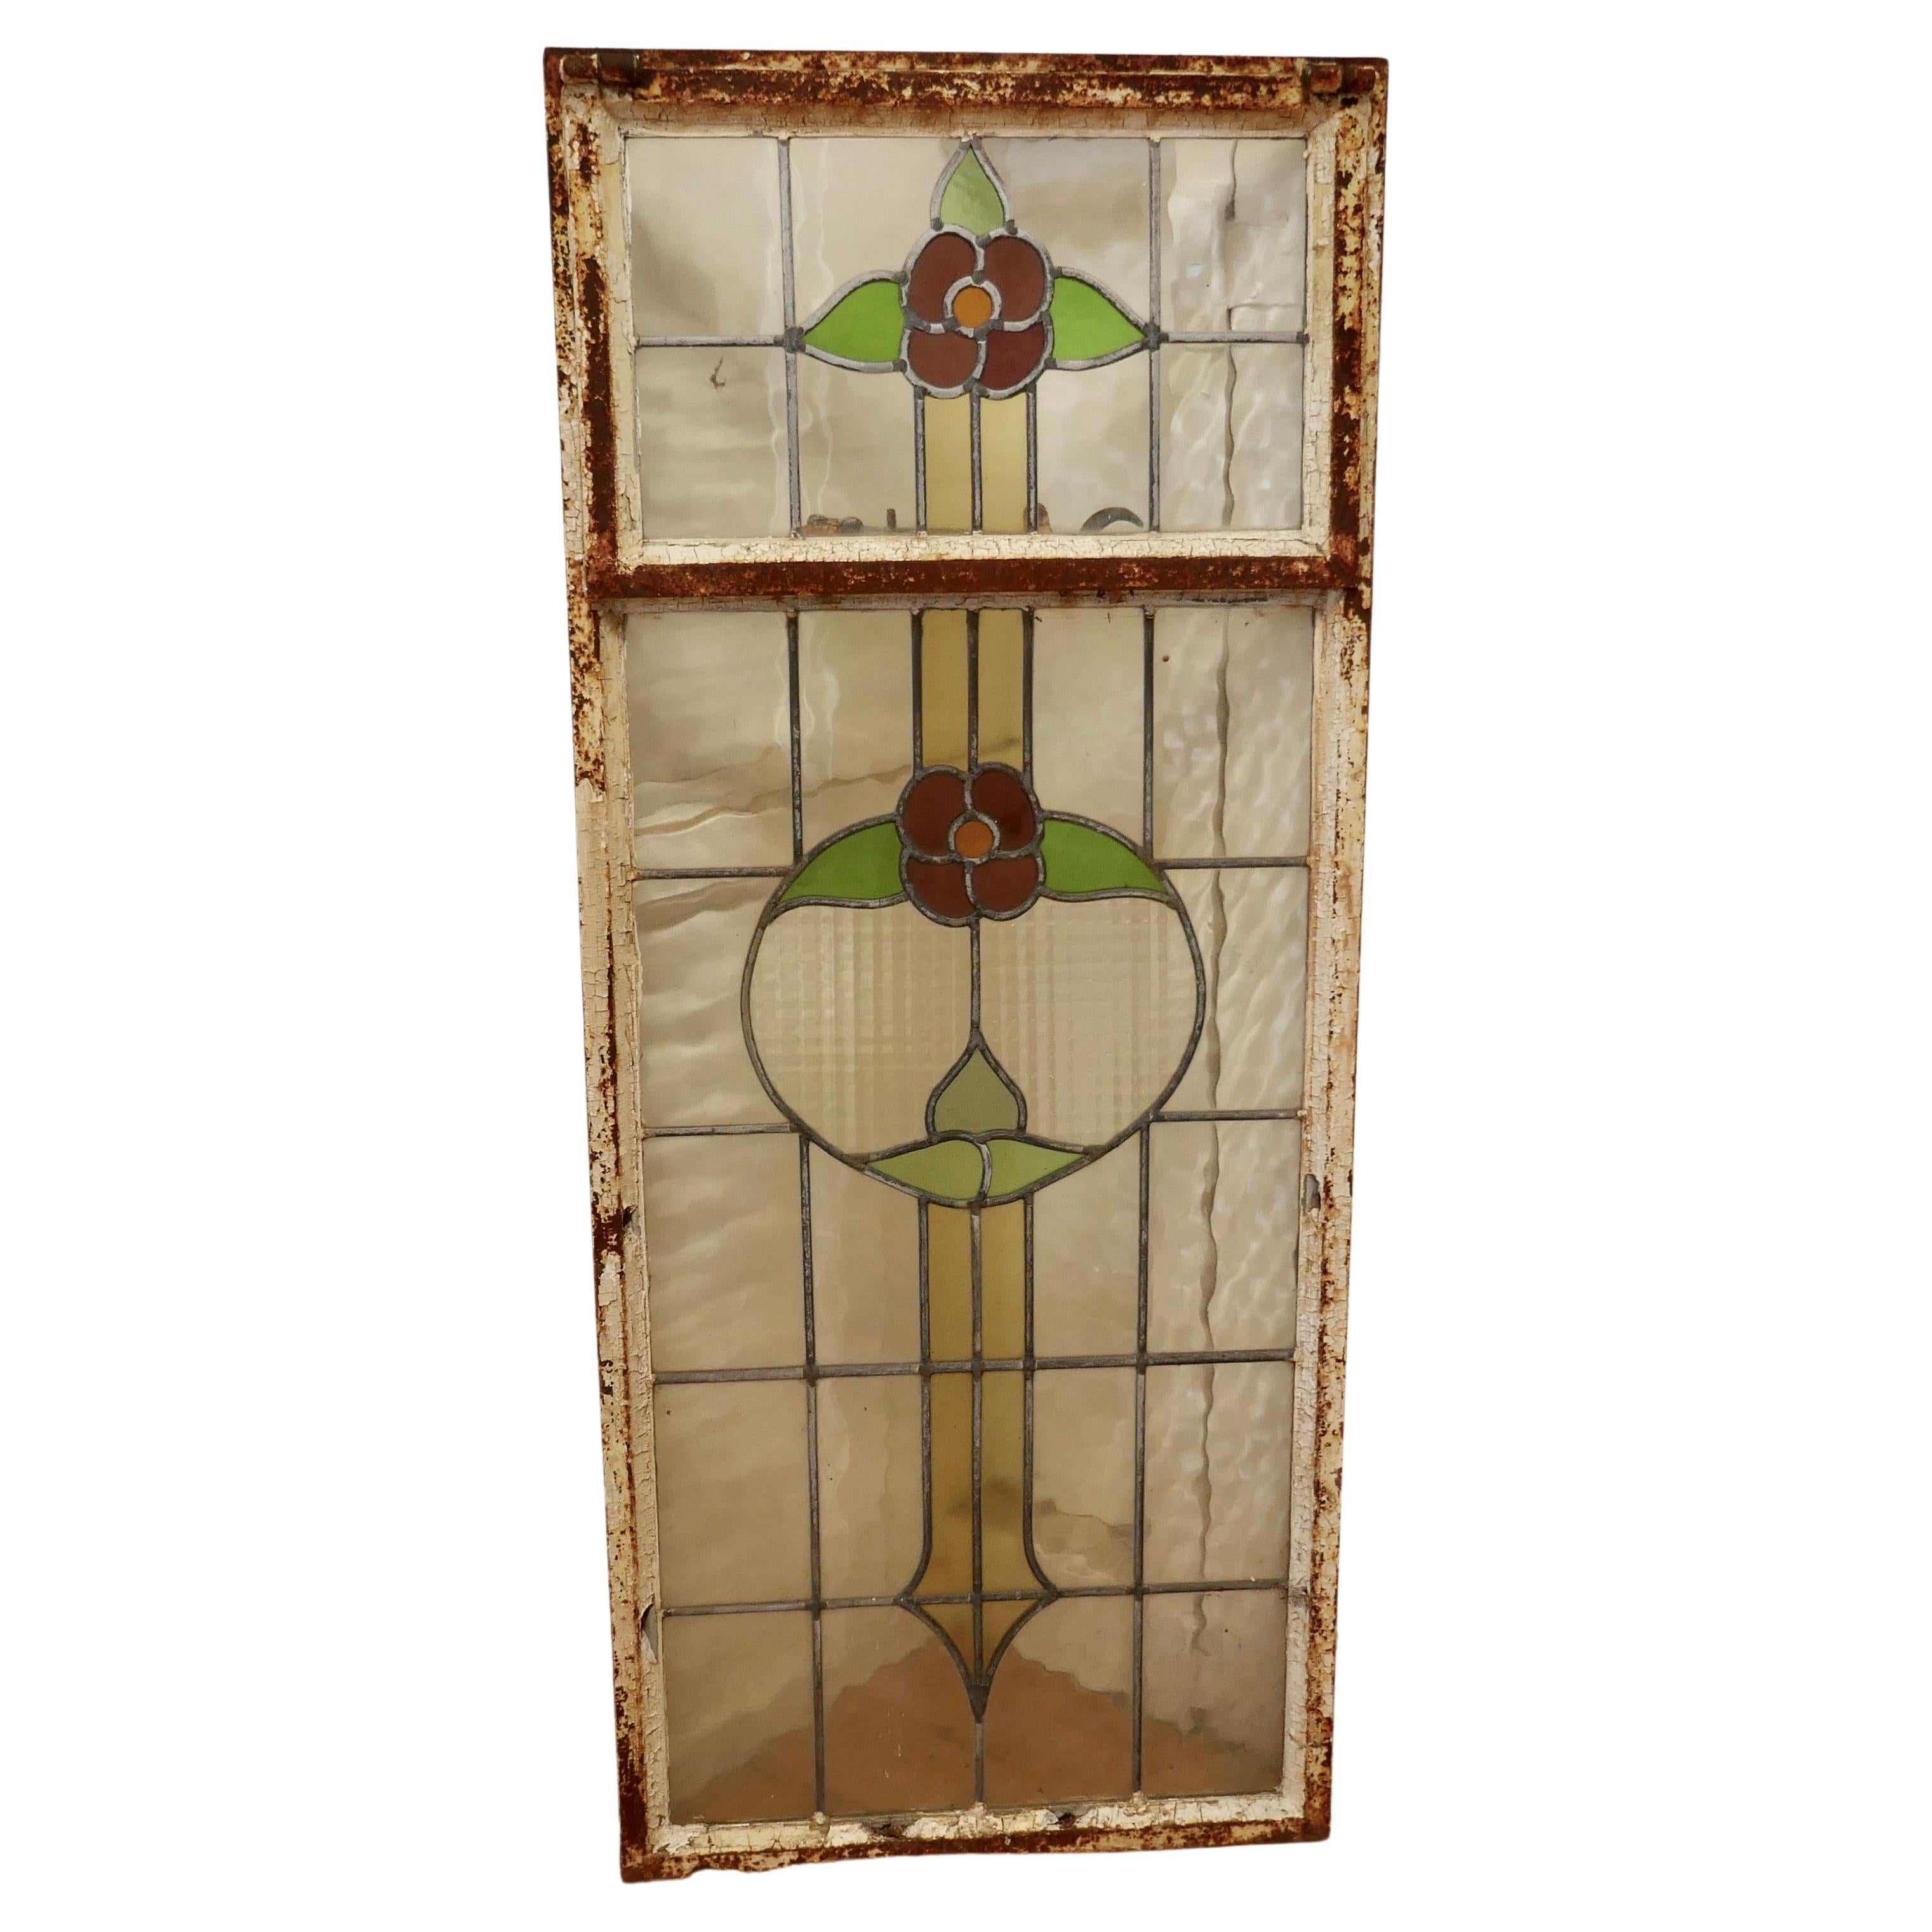 19th Century Arts and Crafts Stained Glass Window